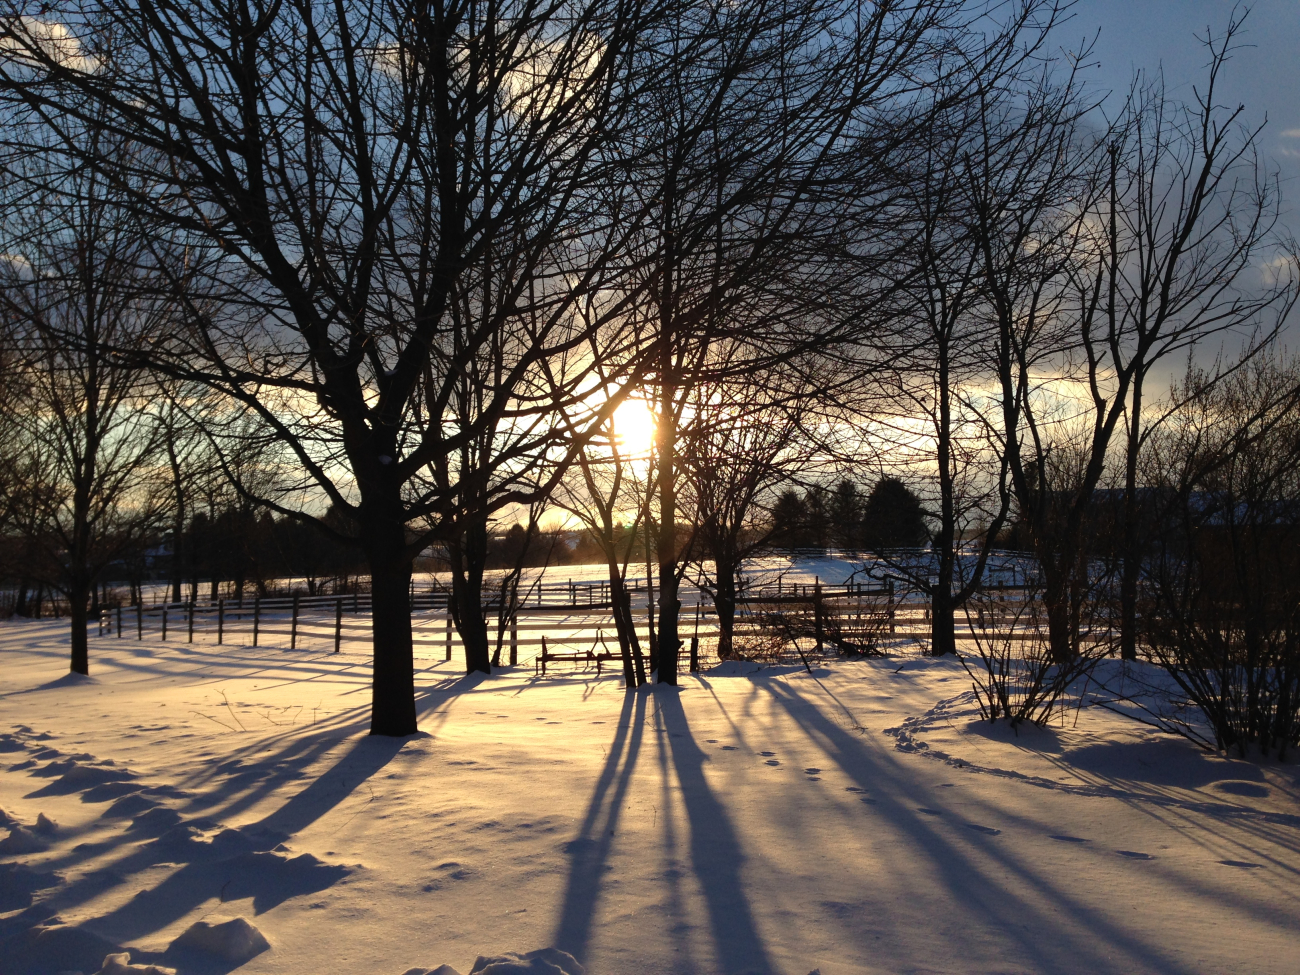 Silhouettes of trees in the late afternoon sun cast shadows on thesnowy landscape